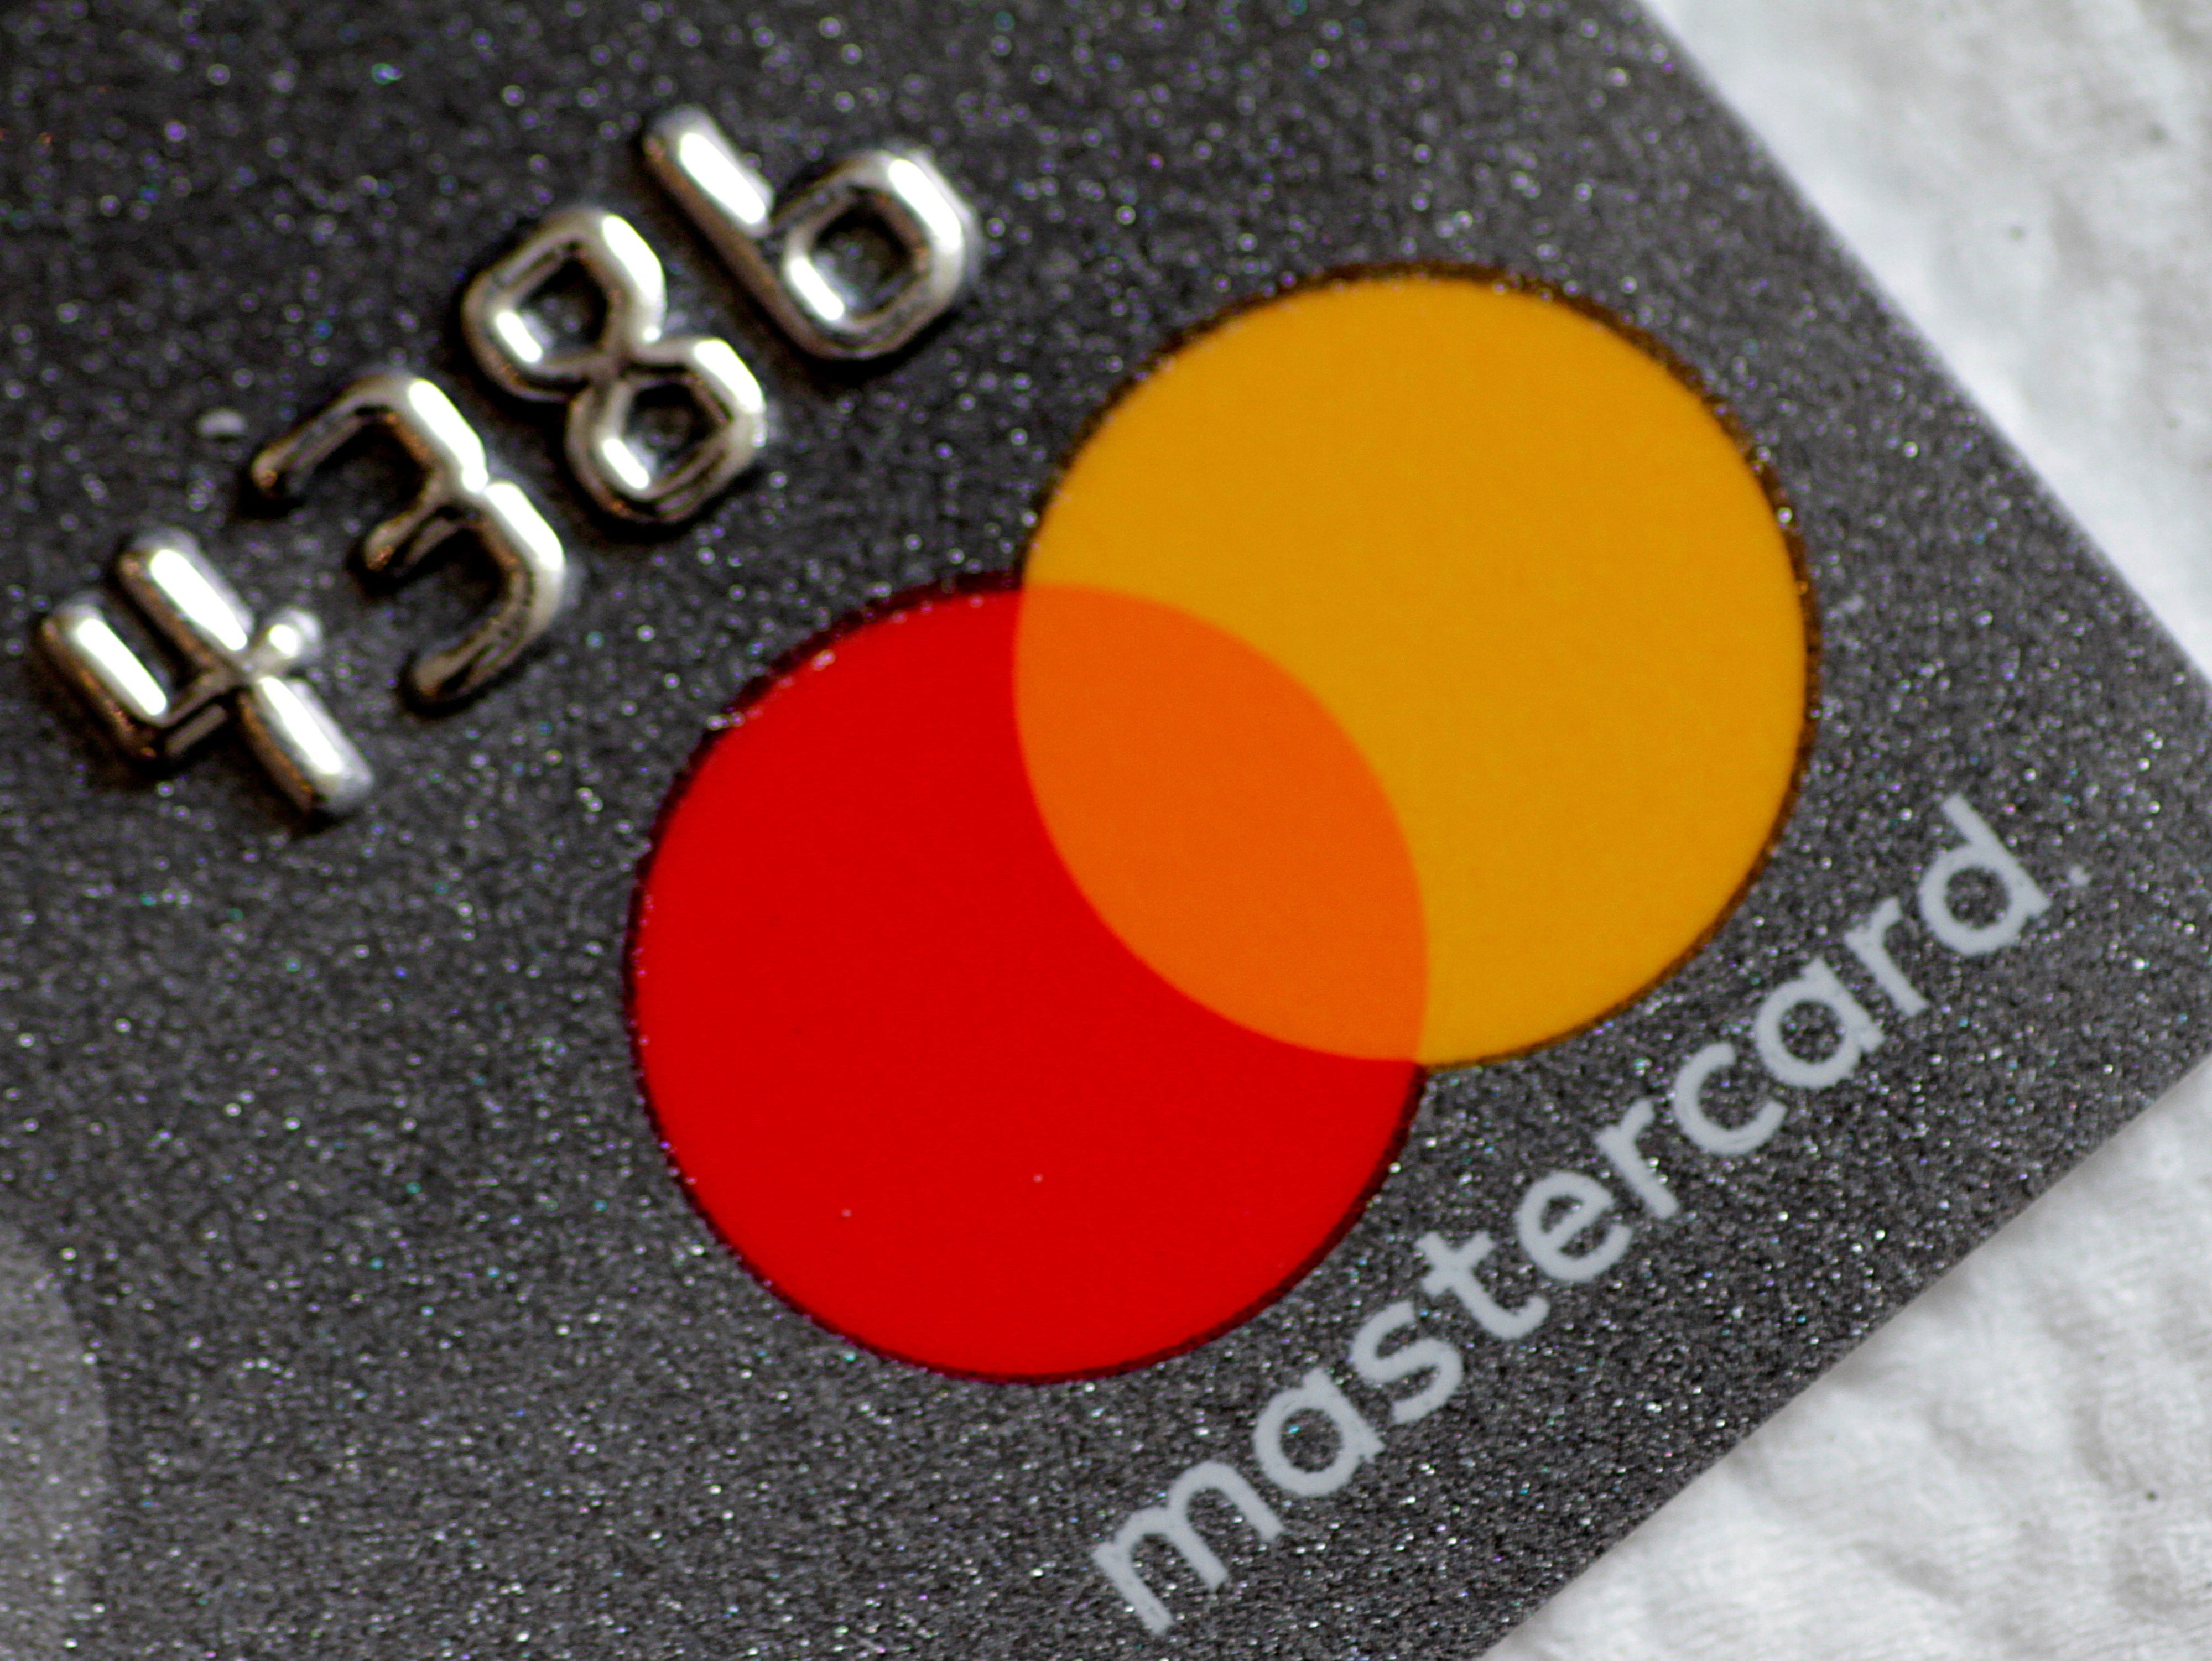 Mastercard is facing the UK’s biggest class action trial over its payment fees